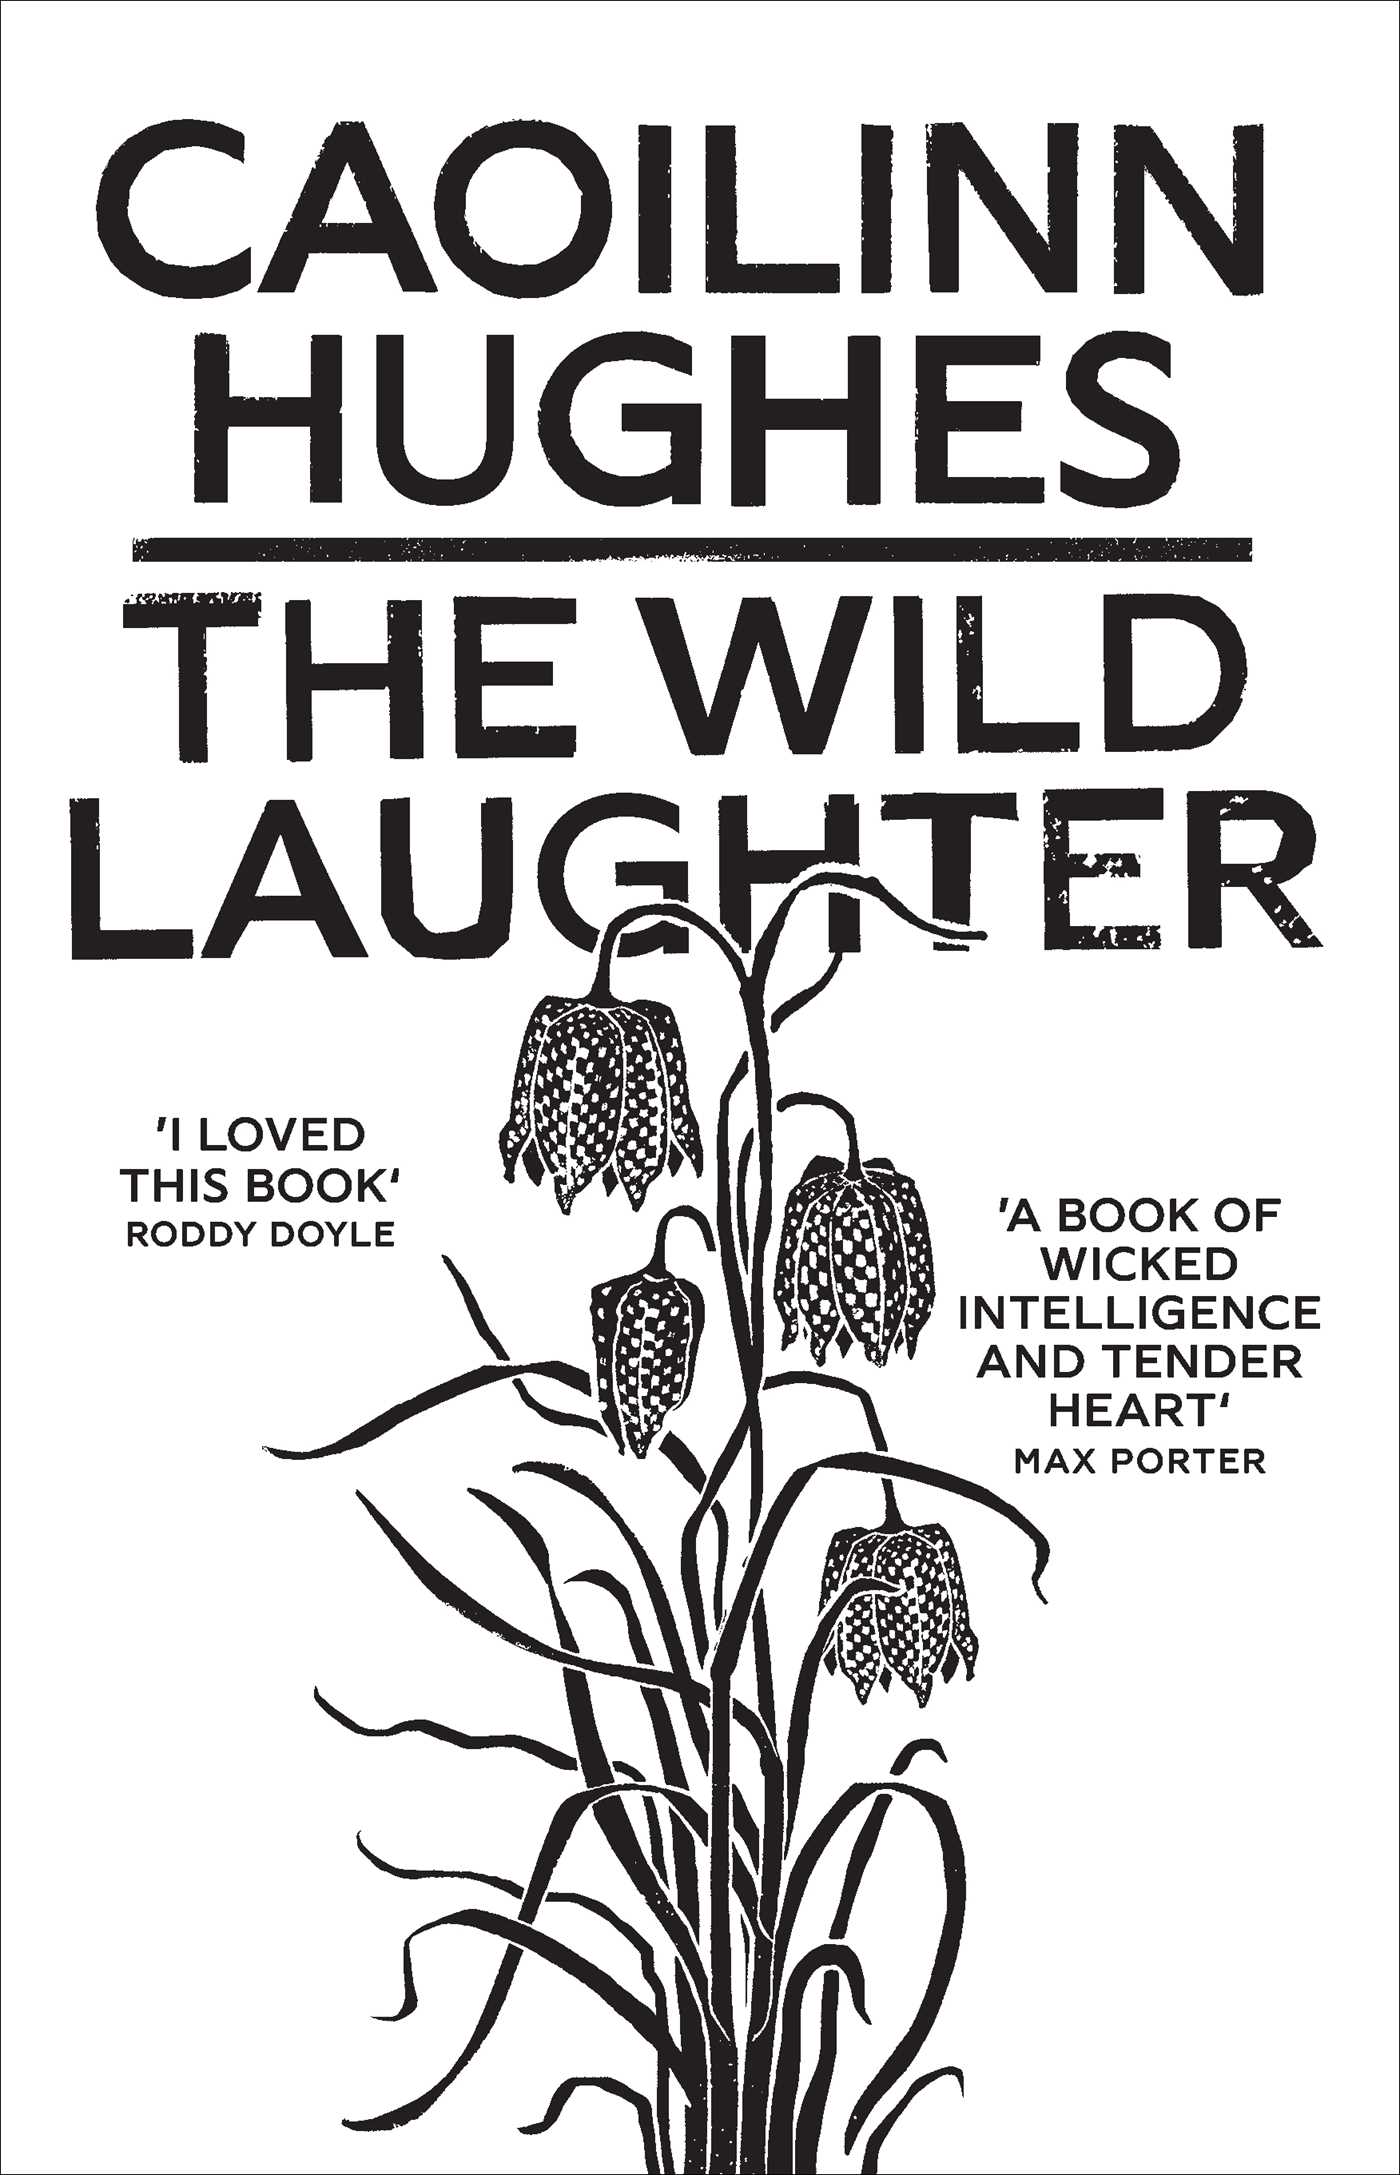 The Wild Laughter by Caoilinn Hughes